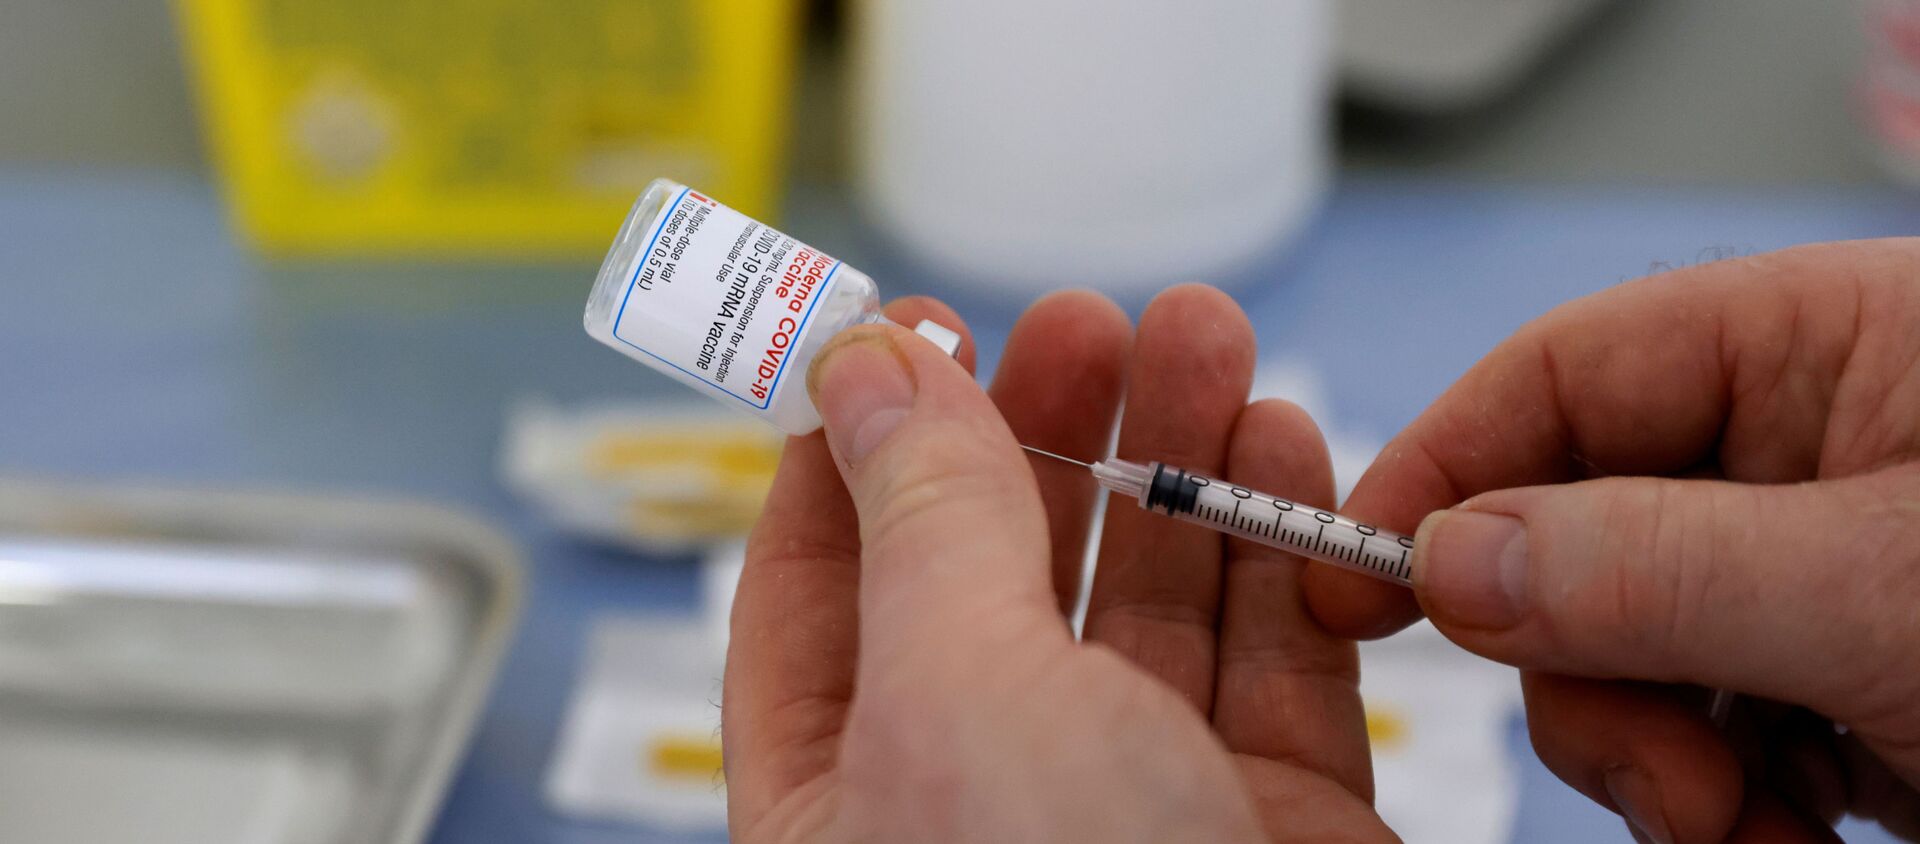 FILE PHOTO: A health worker prepares a syringe with a dose of the Moderna COVID-19 vaccine at a vaccination center in Calais as part of the coronavirus disease (COVID-19) vaccination campaign in France, March 4, 2021. - Sputnik International, 1920